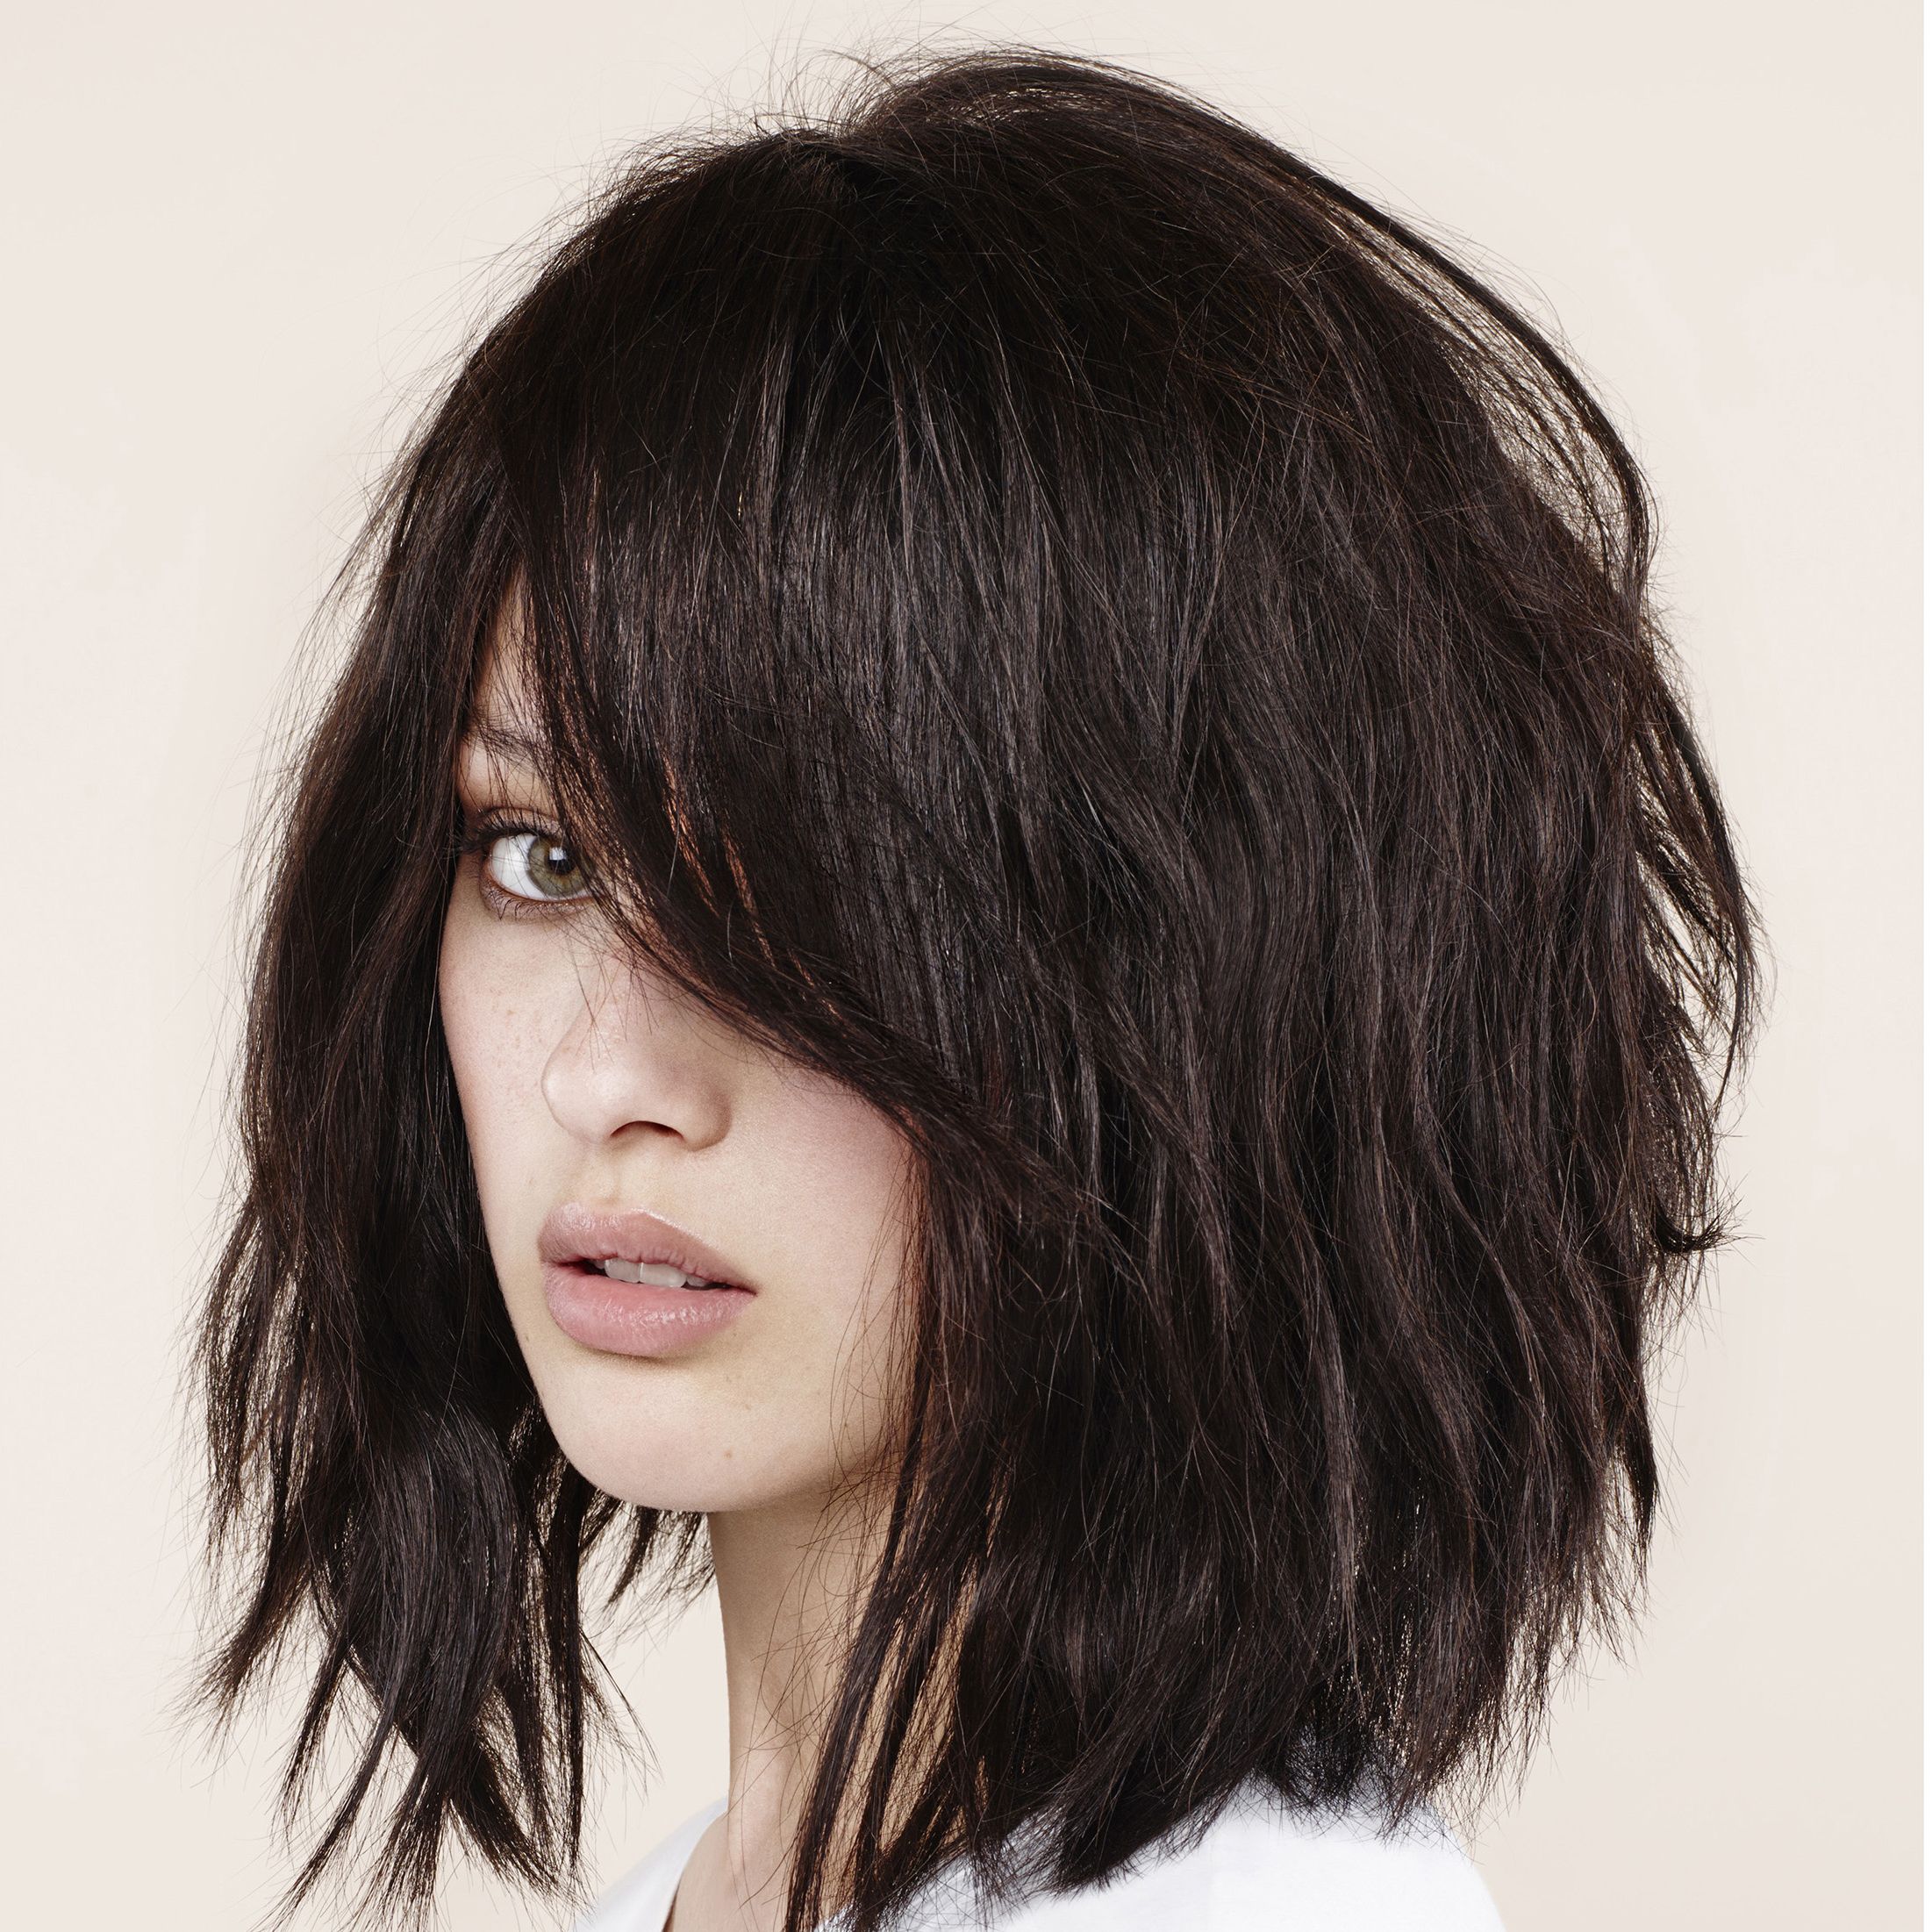 Can A Bob Make You Look Younger Pertaining To Short Hairstyles That Make You Look Younger (View 5 of 25)